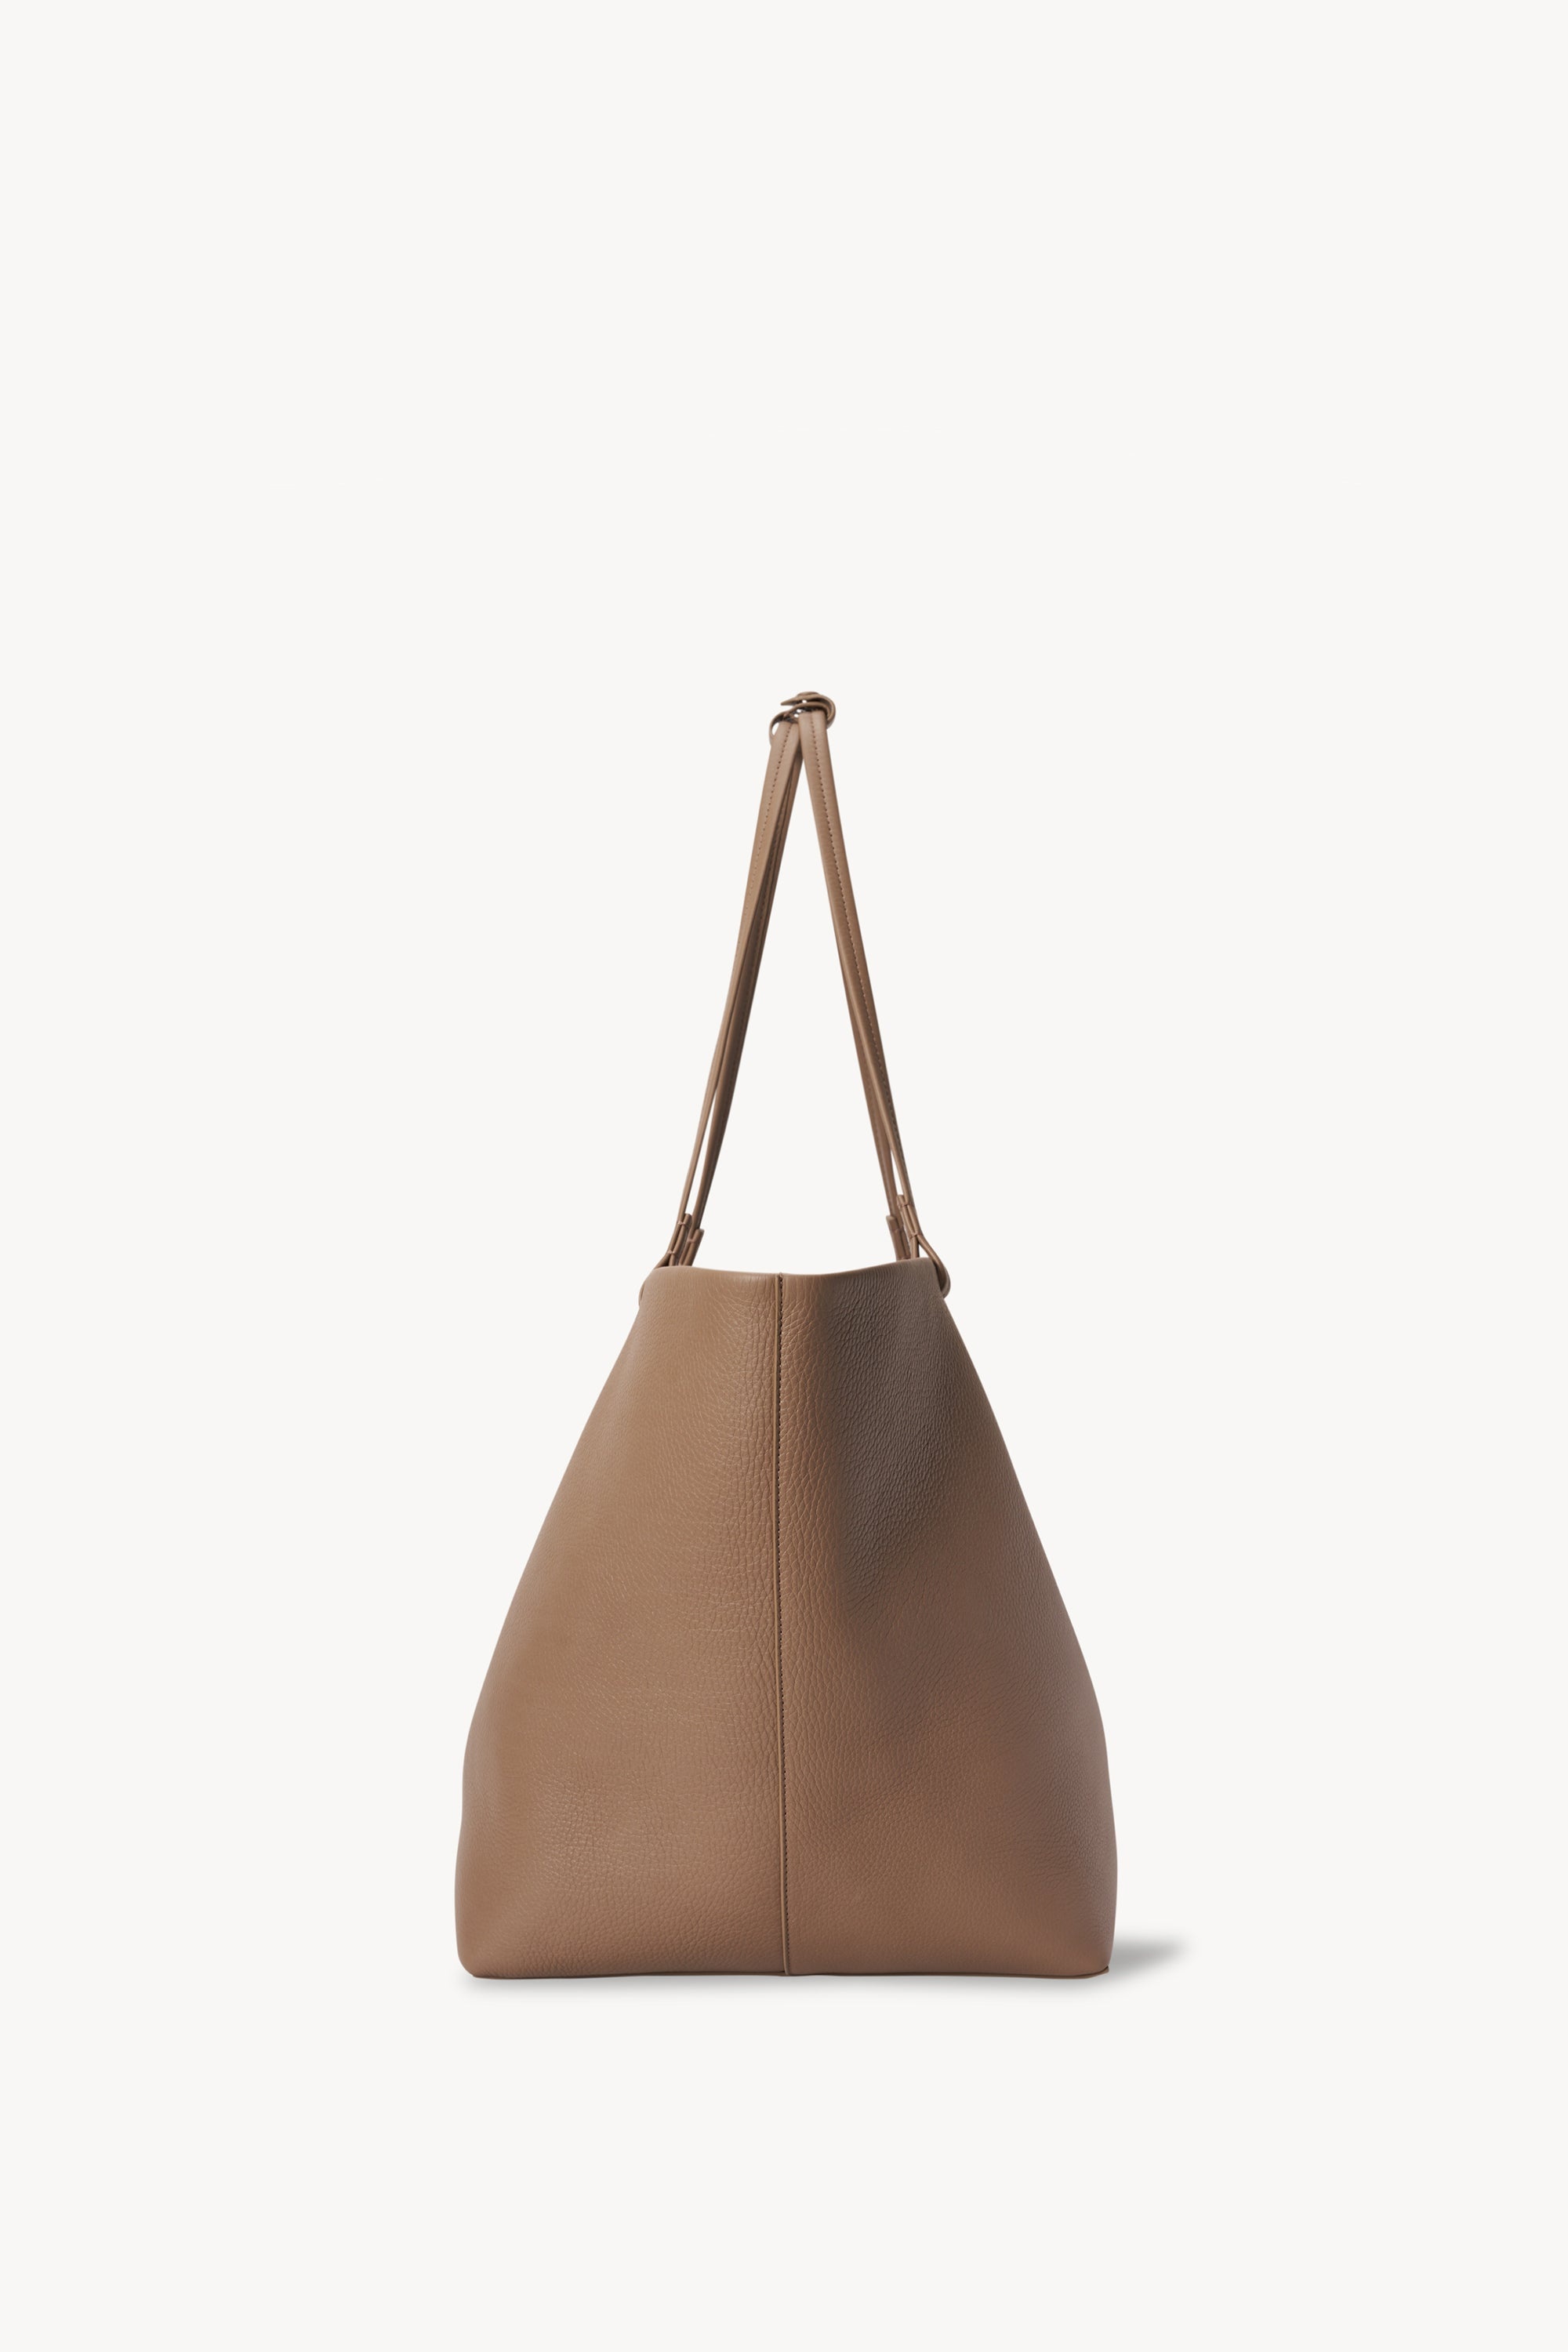 XL Park Tote Bag in Leather - 3